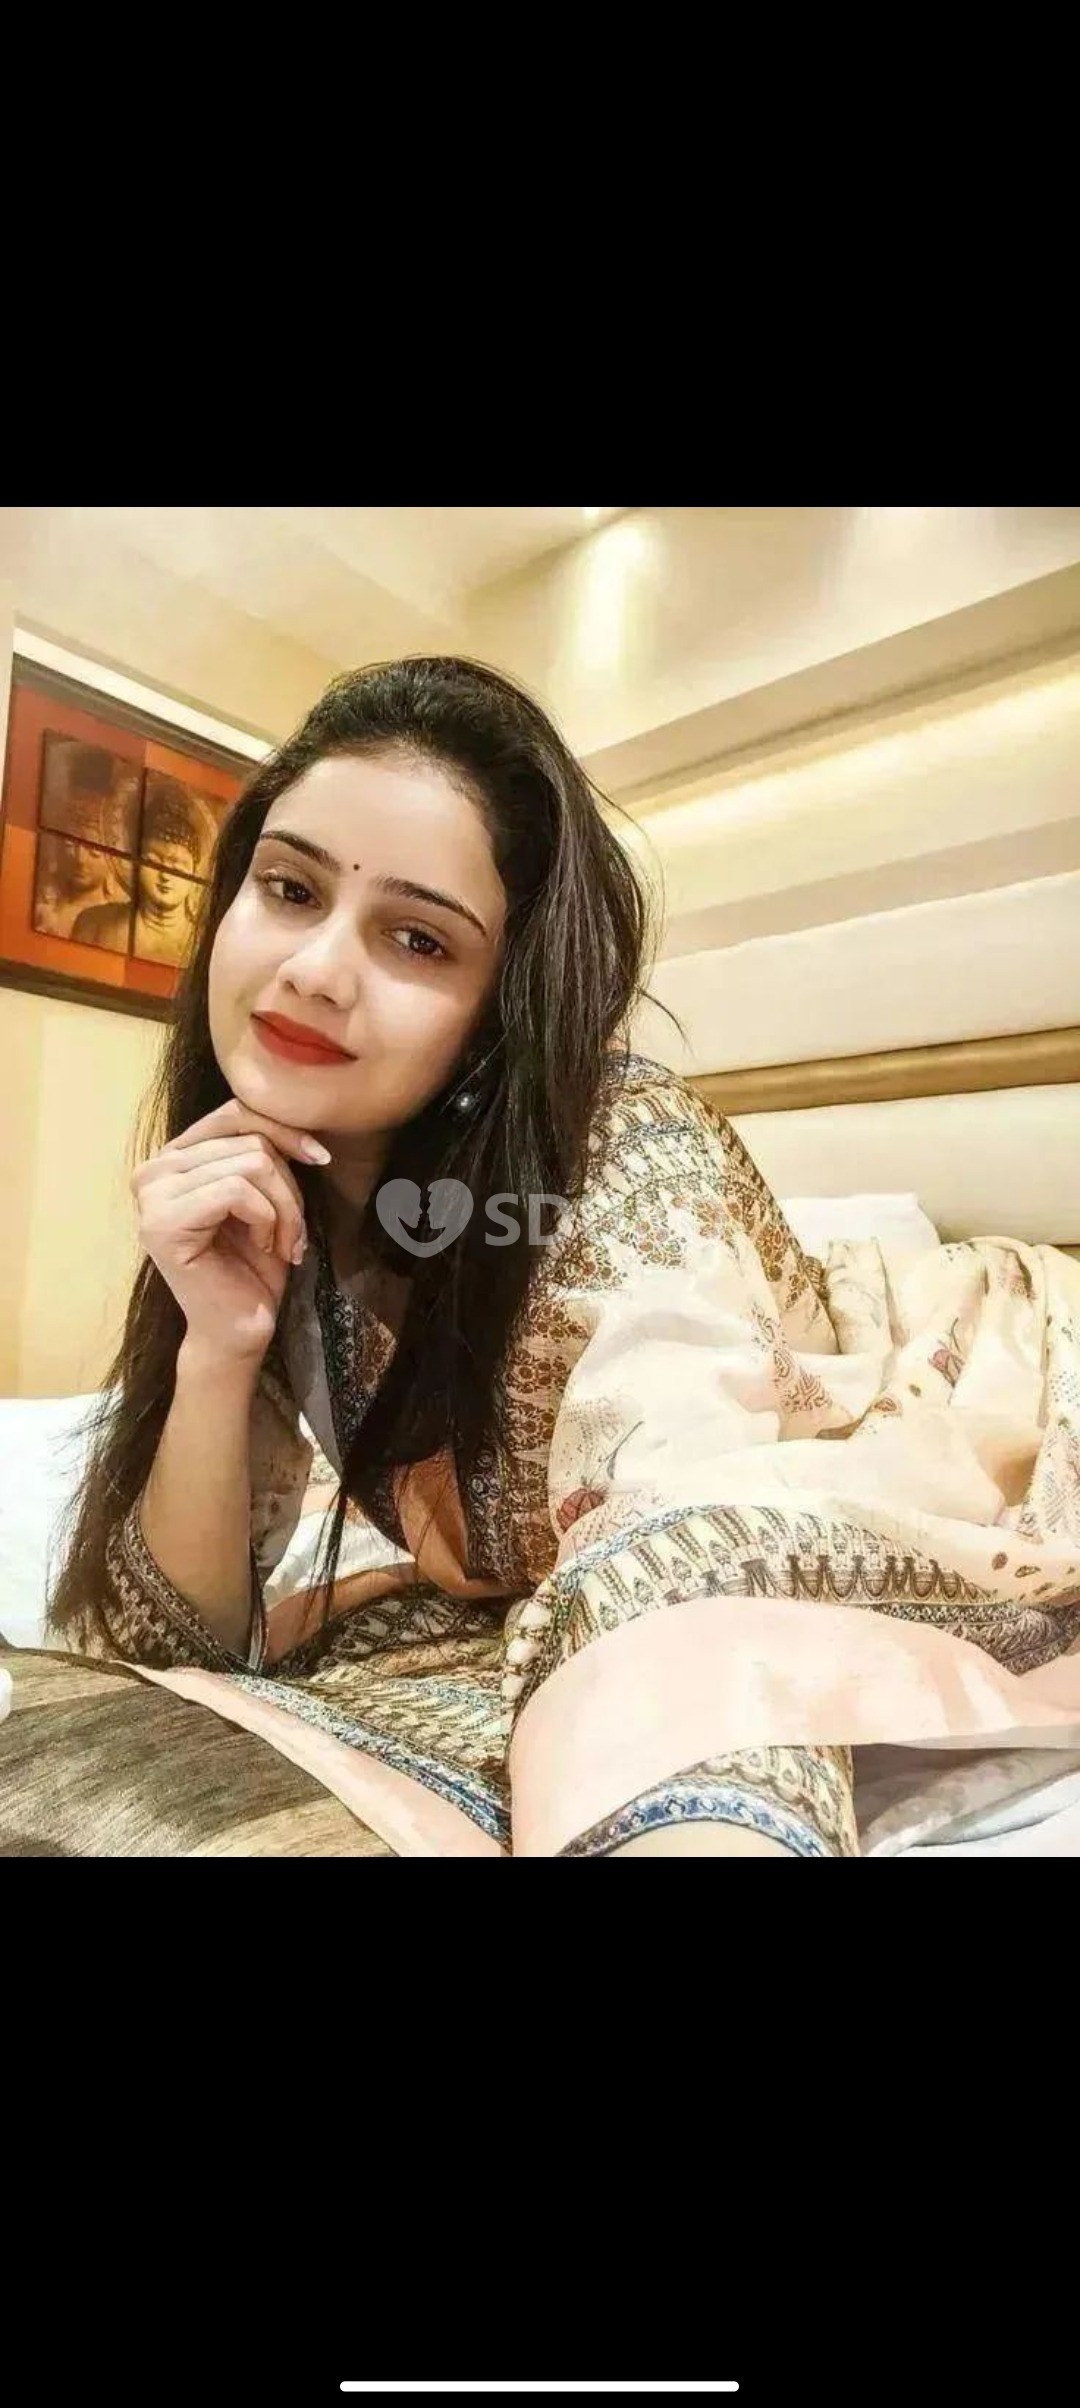 PUNE TODAY LOW PRICE 100% SAFE AND SECURE GENUINE CALL GIRL AFFORDABLE PRICE...m CALL NOW💕💕💕